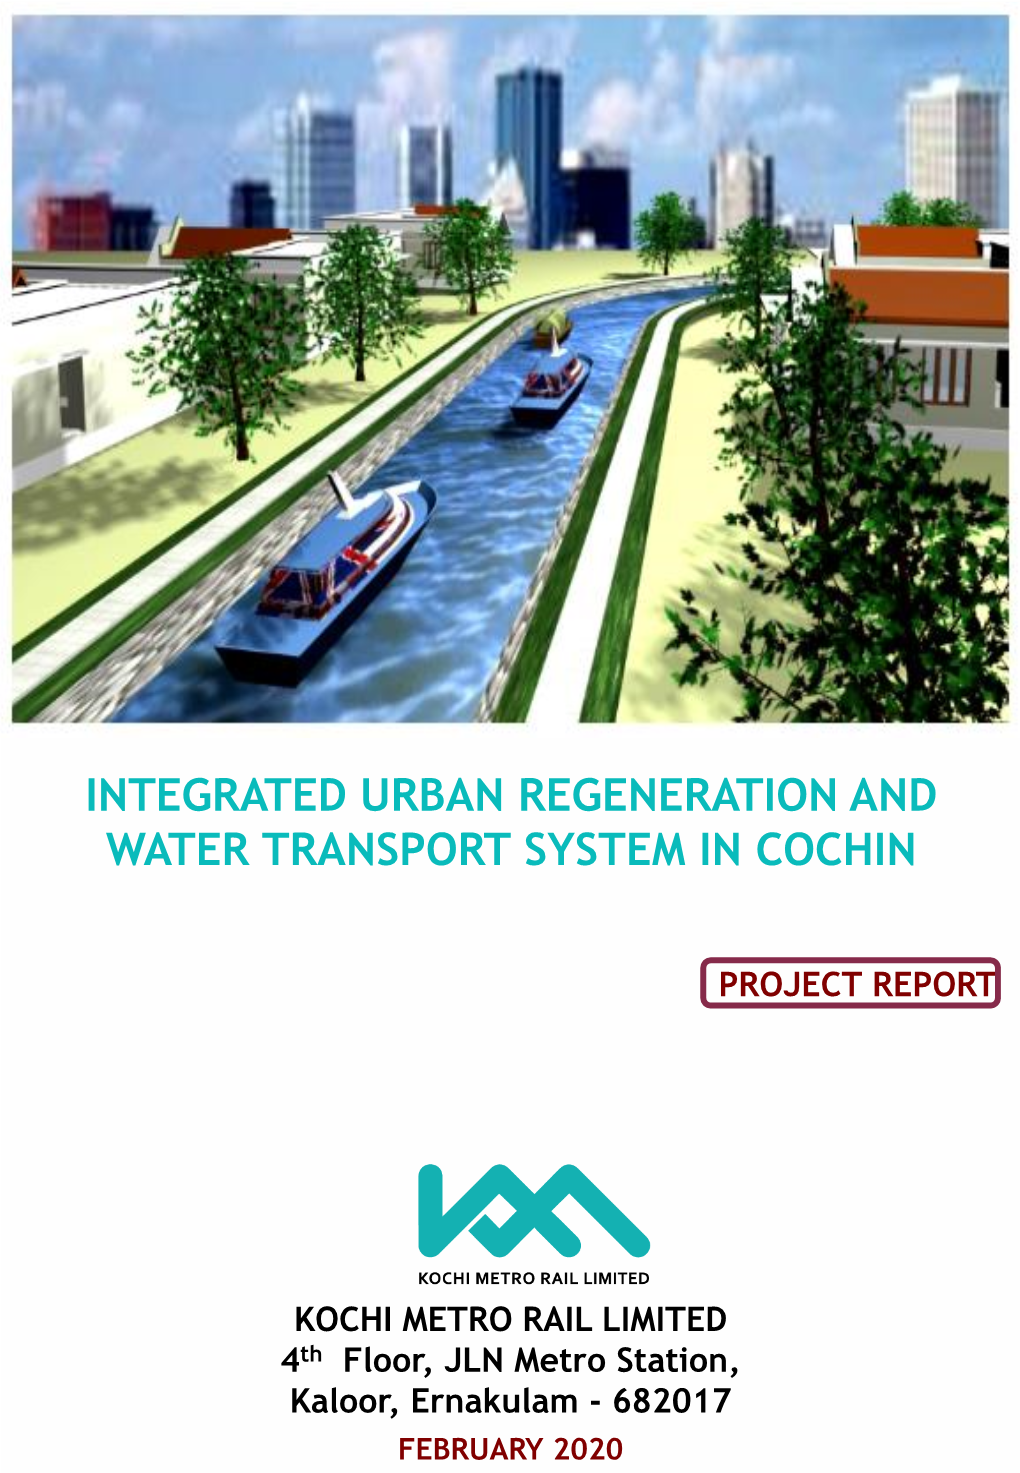 Integrated Urban Regeneration and Water Transport System in Cochin